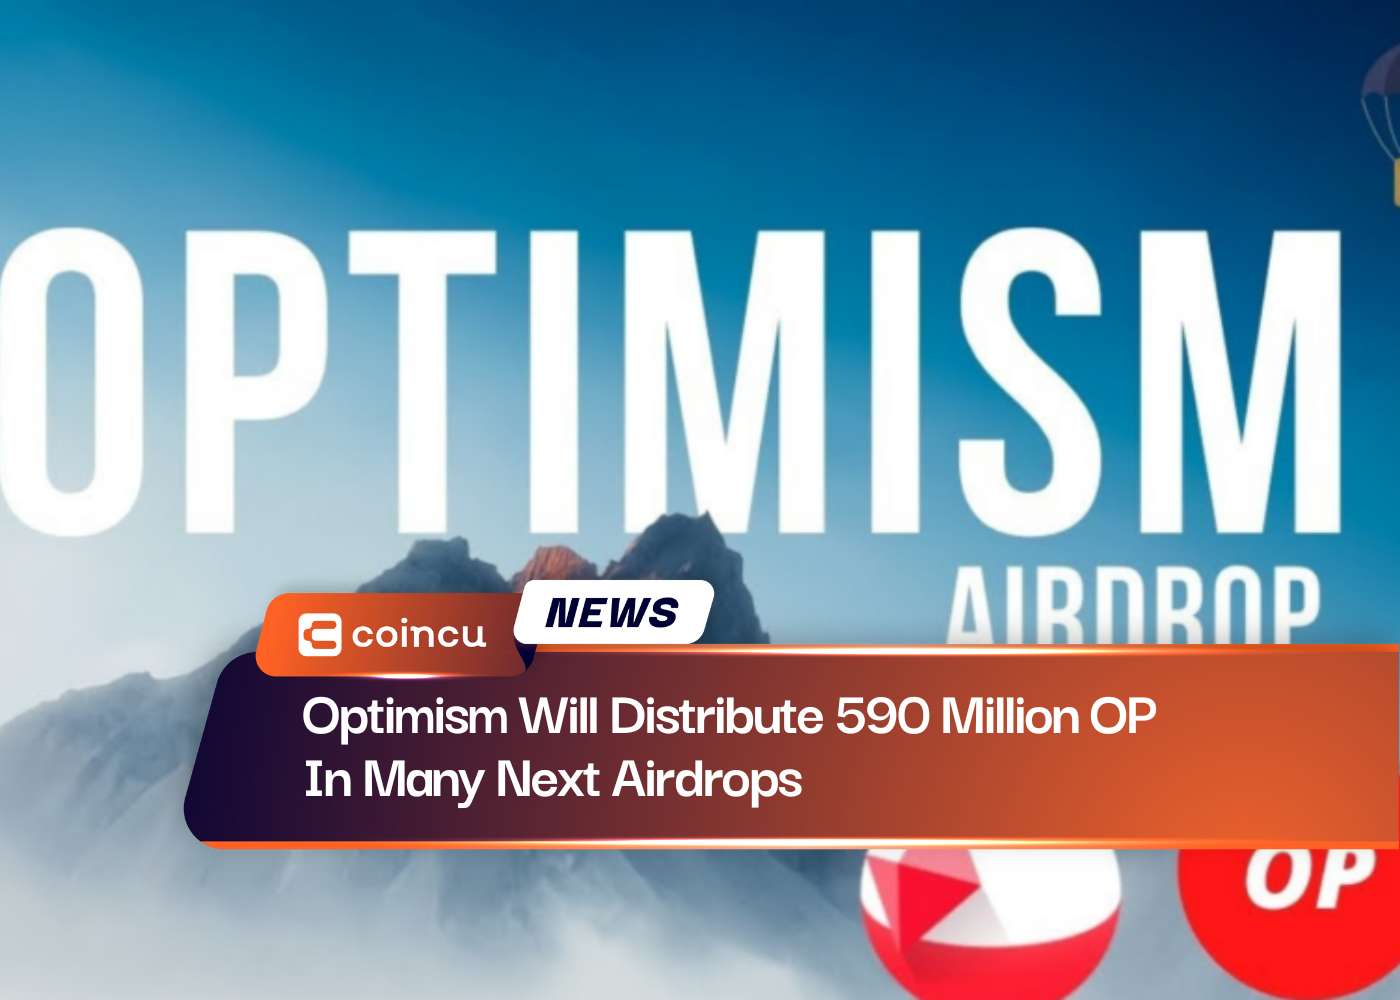 Optimism Will Distribute 590 Million OP In Many Next Airdrops